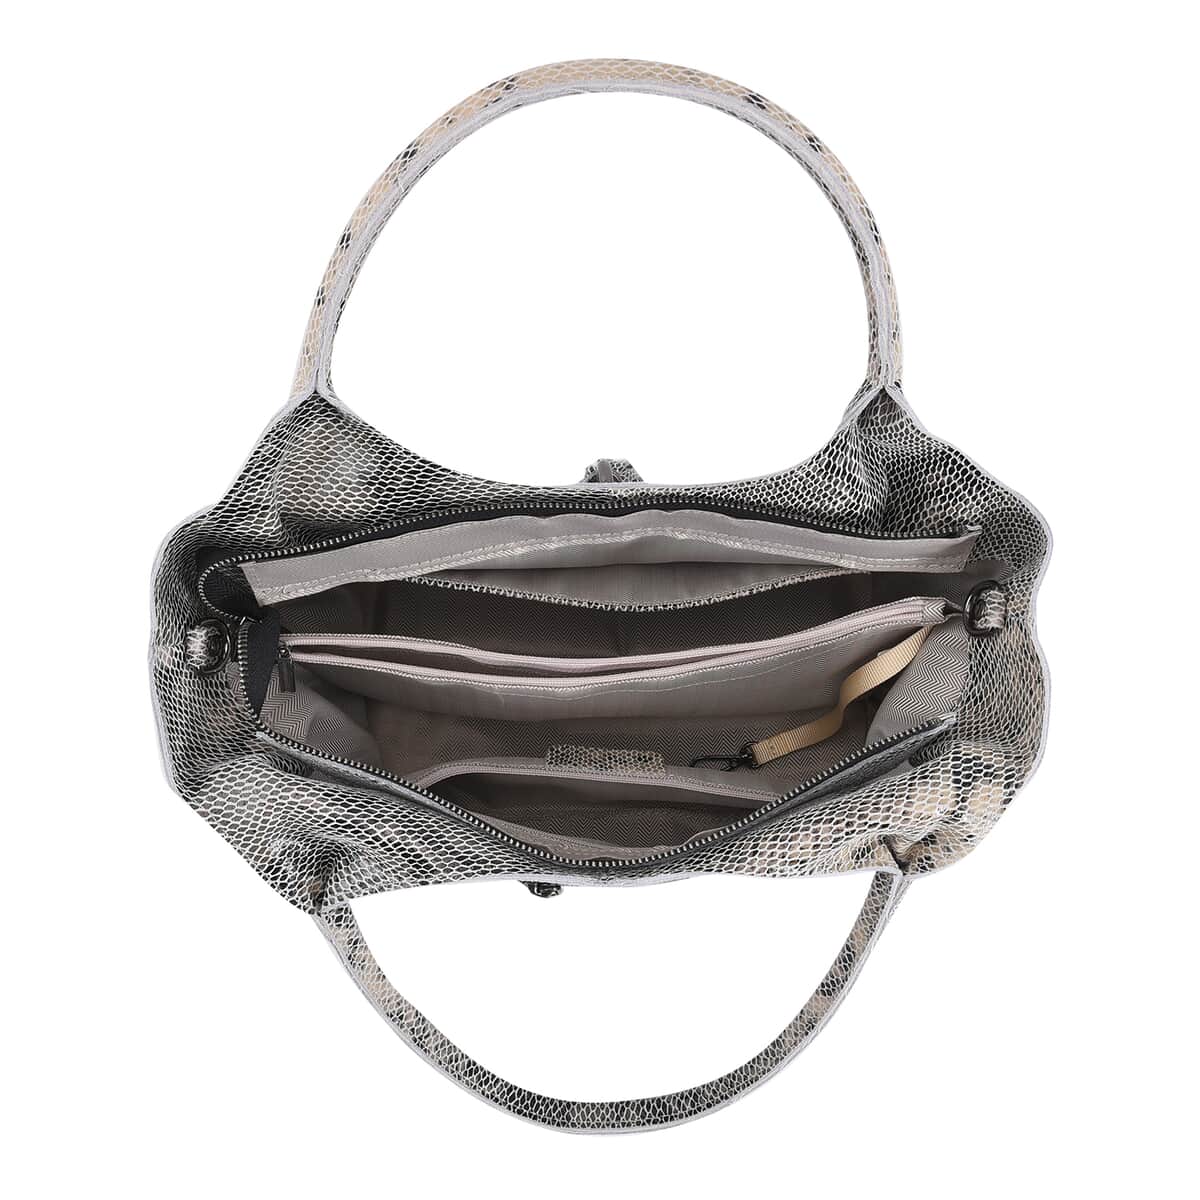 Gray Snake Print Genuine Leather Hobo Bag with Detachable Shoulder Strap and Handle Drop image number 5